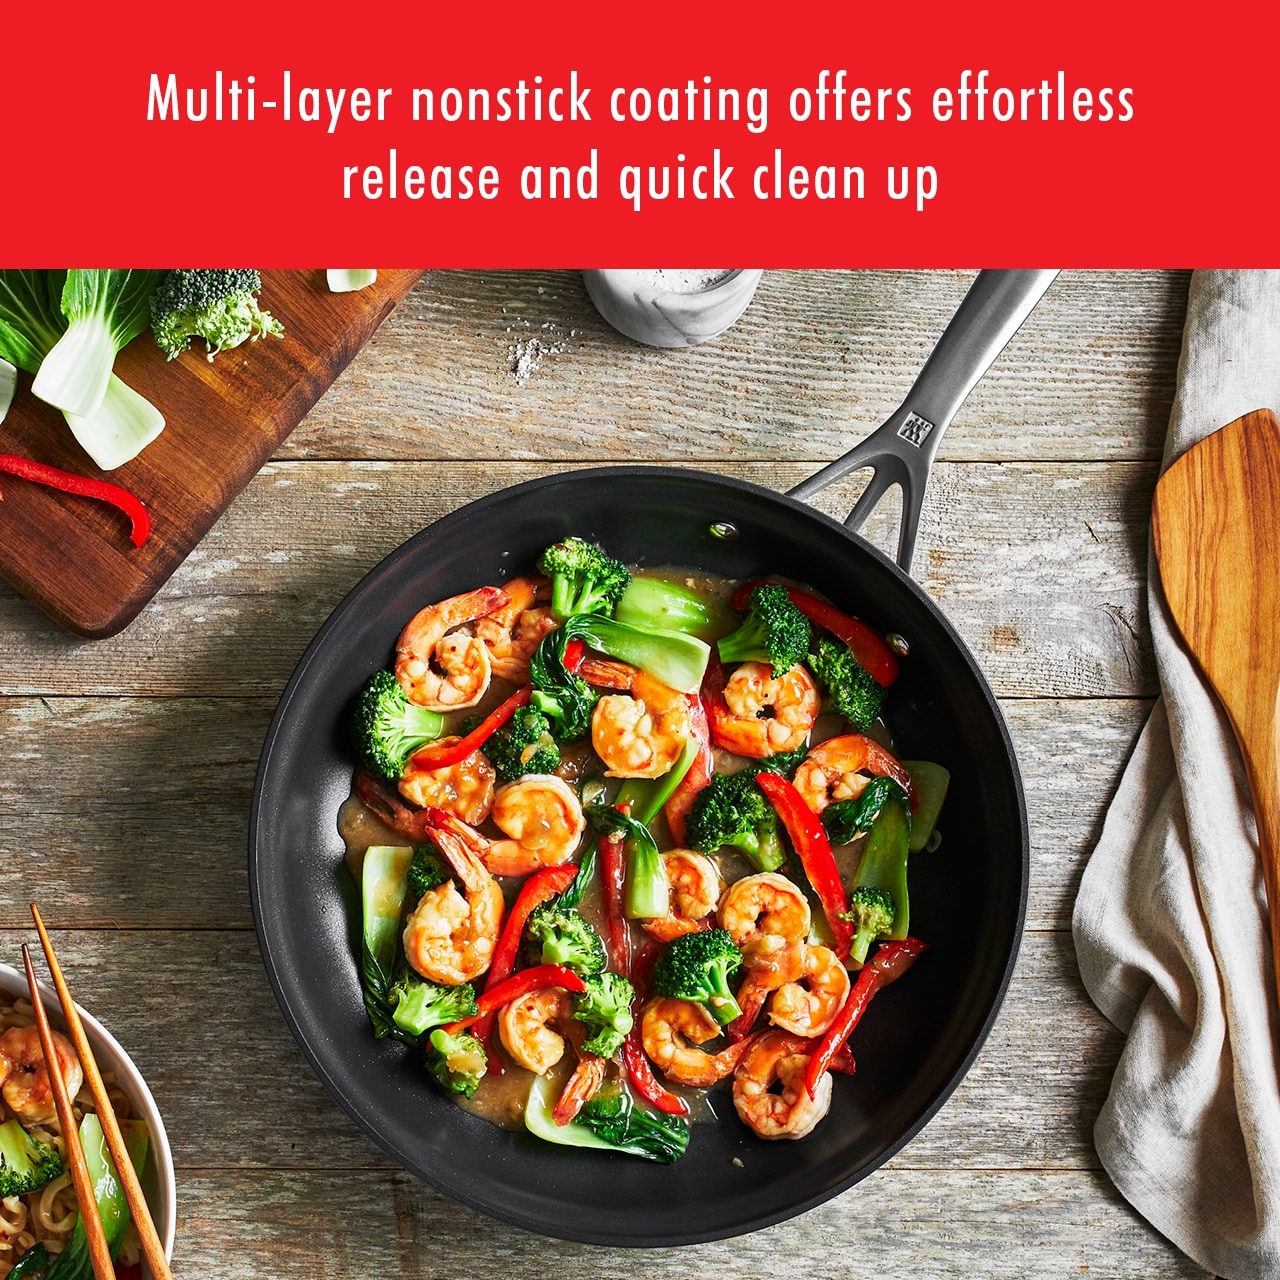 https://ak1.ostkcdn.com/images/products/is/images/direct/74f7667465d3715ba05d8d90f94bdf1d0ced0f38/ZWILLING-Motion-Nonstick-Hard-Anodized-10-Piece-Cookware-Set-in-Grey%2C-Dutch-Oven%2C-Fry-pan%2C-Saucepan.jpg